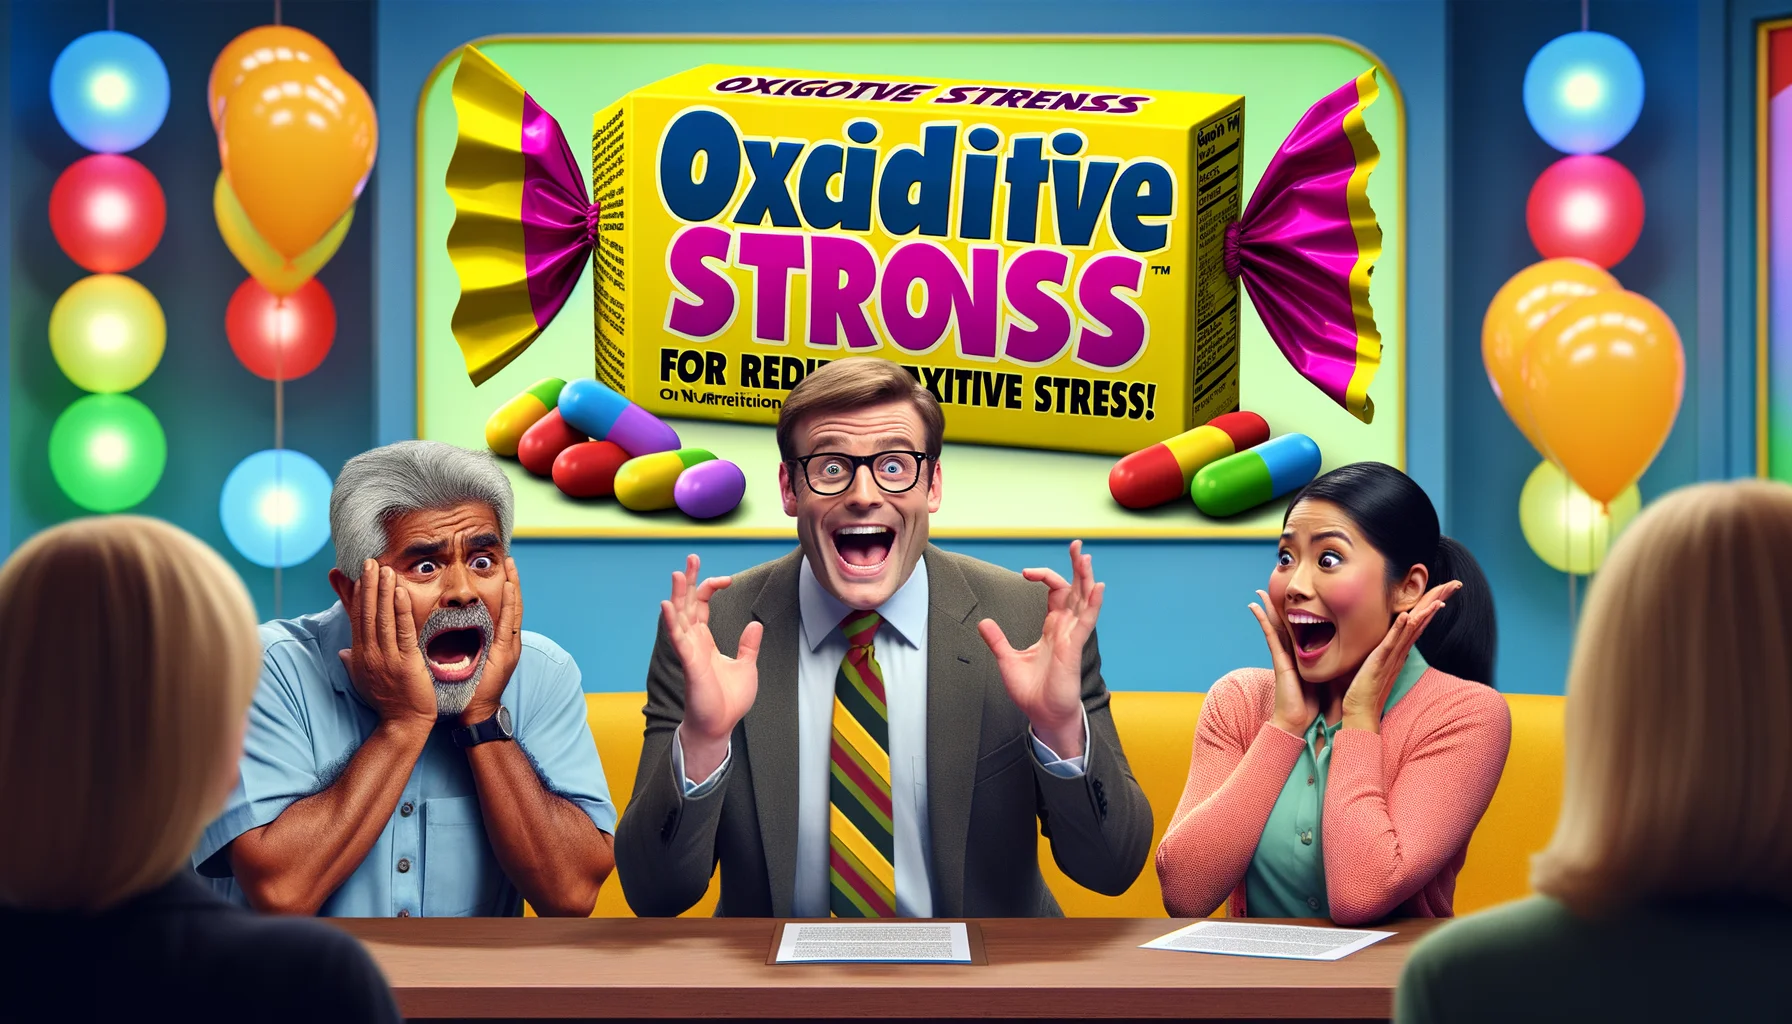 Create a humorous and realistic image of a brightly labelled 'Candy for Reducing Oxidative Stress'. The scene is set in a perfect scenario where a middle-aged Caucasian male nutritionist enthusiastically presents this candy in a colorful TV show set. A visibly surprised middle-aged Hispanic female audience member is about to taste the candy, while a South Asian female co-host is eagerly holding a pack of the candy. The atmosphere is festive, enhanced with oversized cheerful banners reading 'Oxidative Stress Begone!', and the show's logo adding a touch of playfulness in the background.